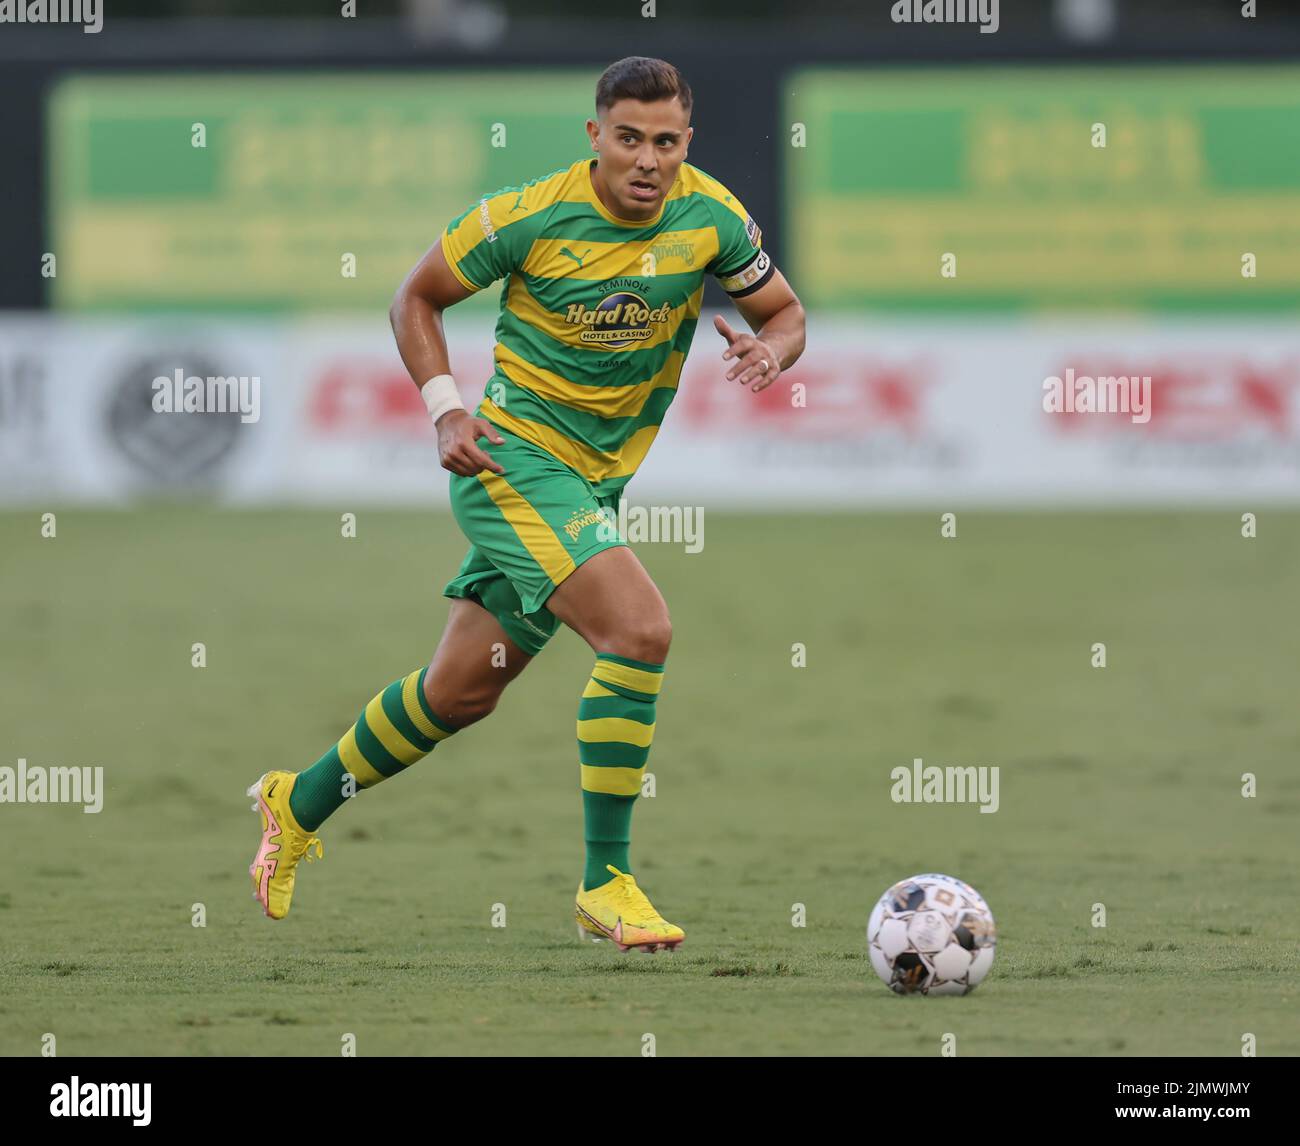 St. Petersburg, FL: Tampa Bay Rowdies defender Aaron Guillen (33) dribbles the ball up the pitch during a USL soccer game against Detroit City, Saturd Stock Photo